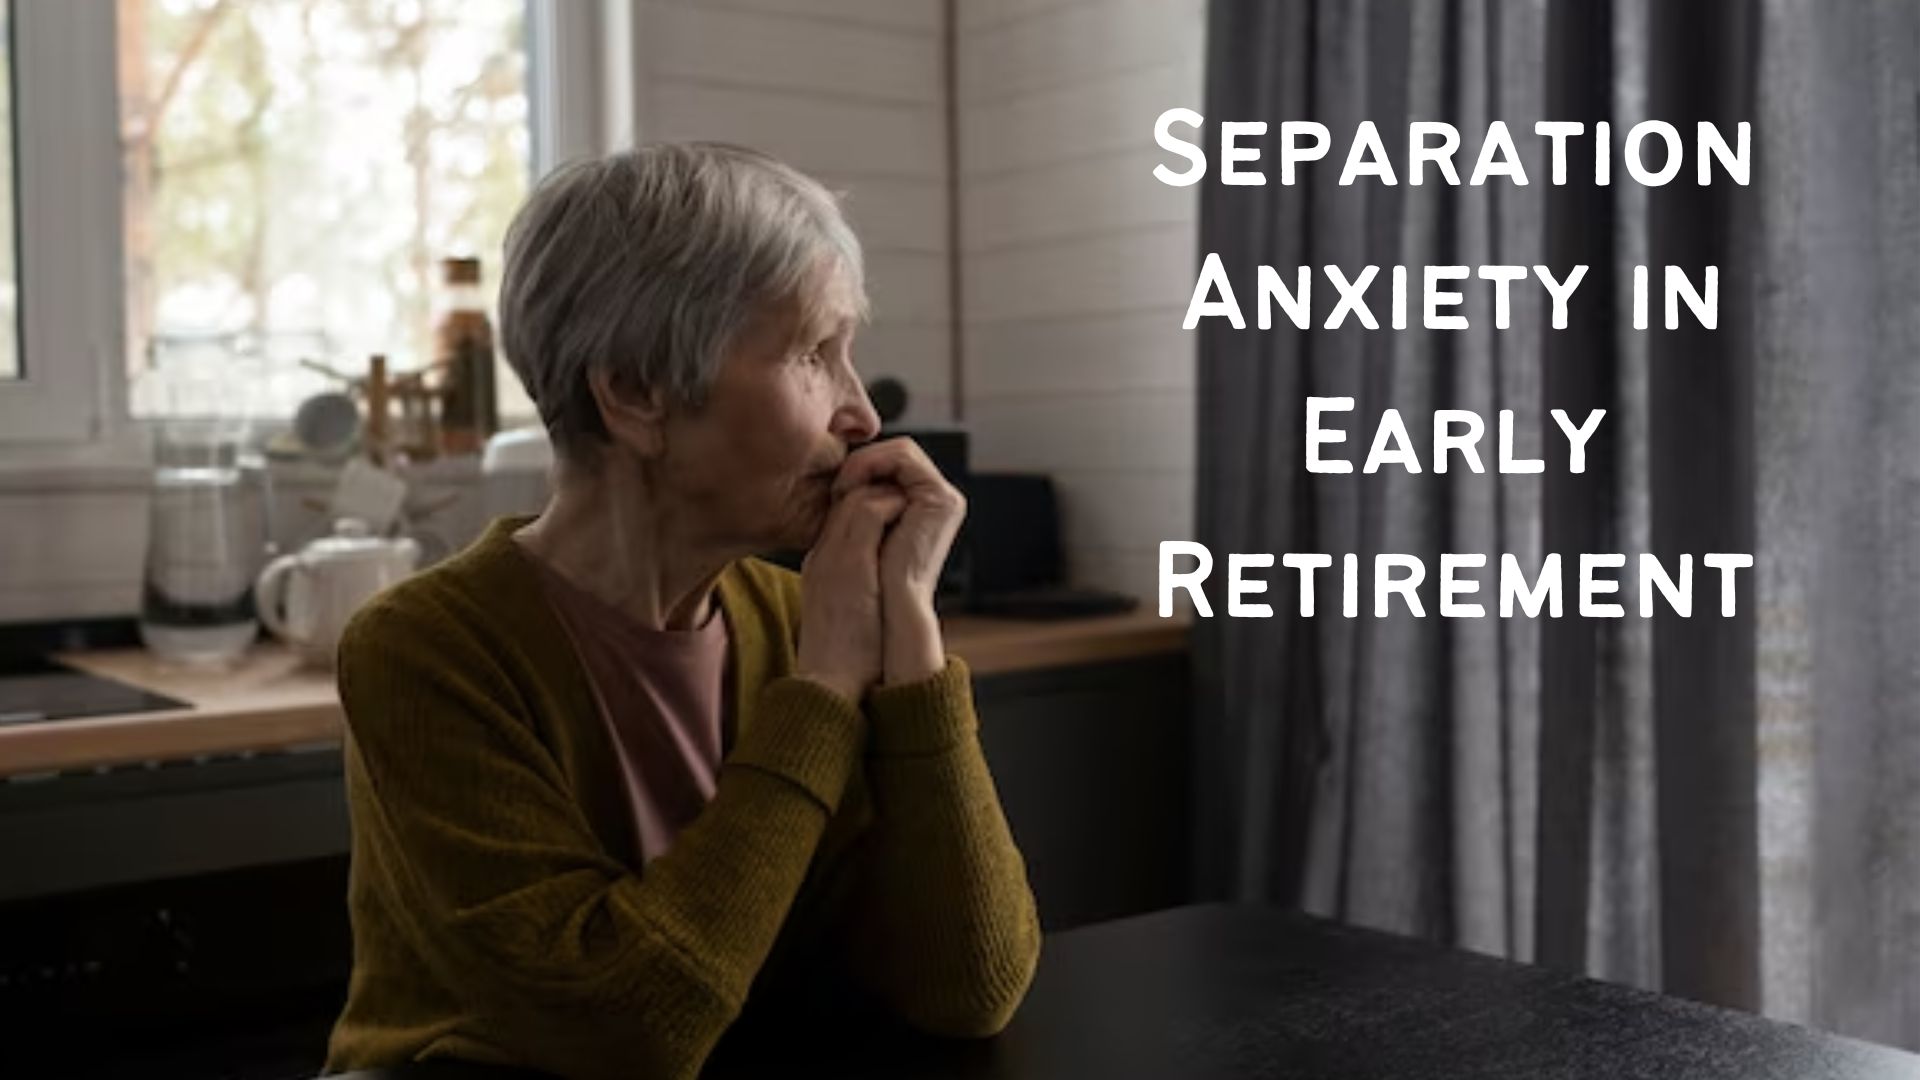 Separation Anxiety in Early Retirement